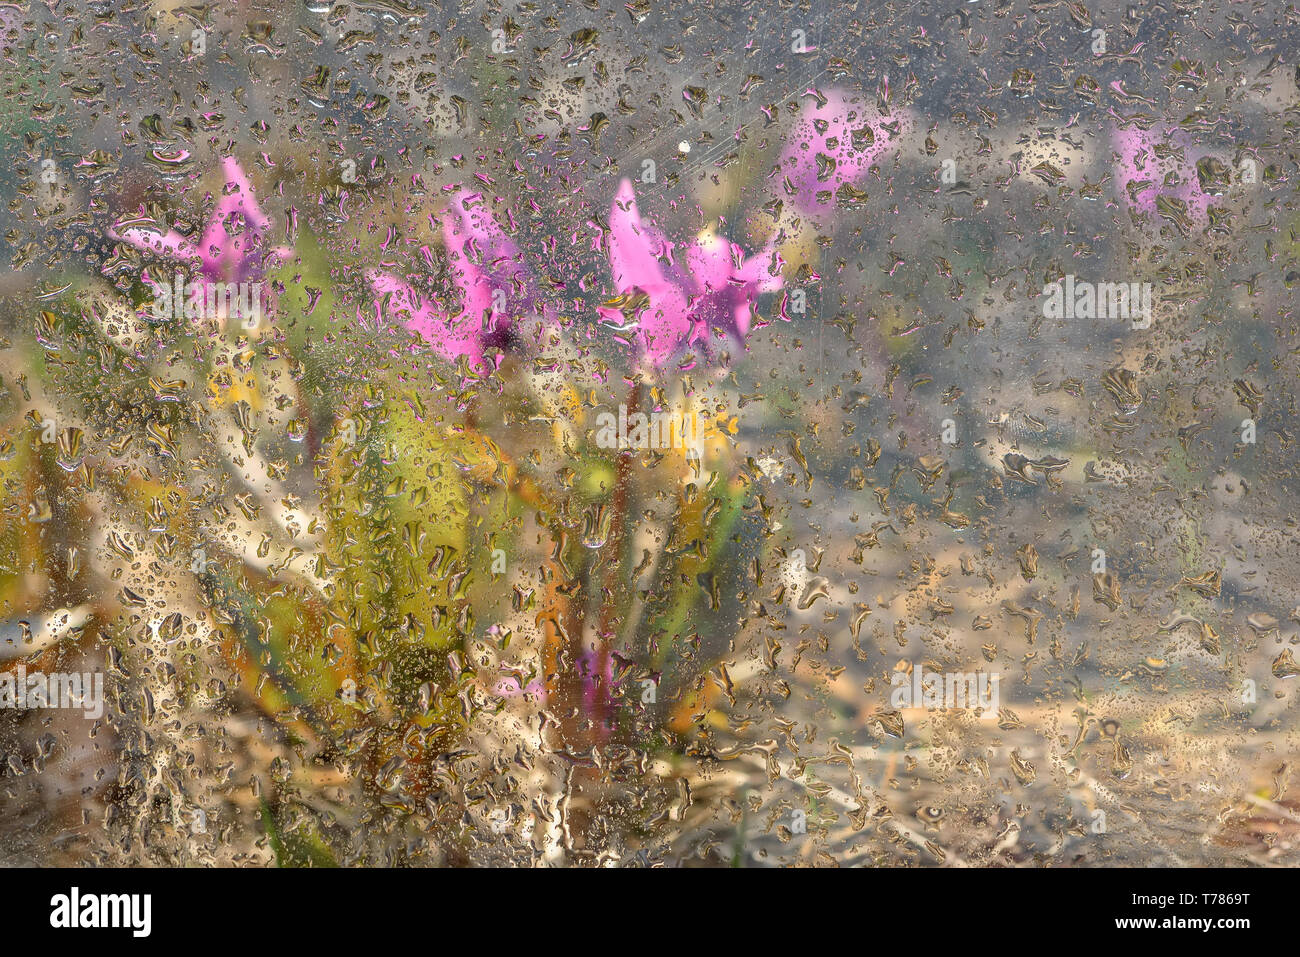 Abstract beautiful floral background with pink wild flowers of a dogtooth violet in a meadow close up through the glass with drops of rain Stock Photo